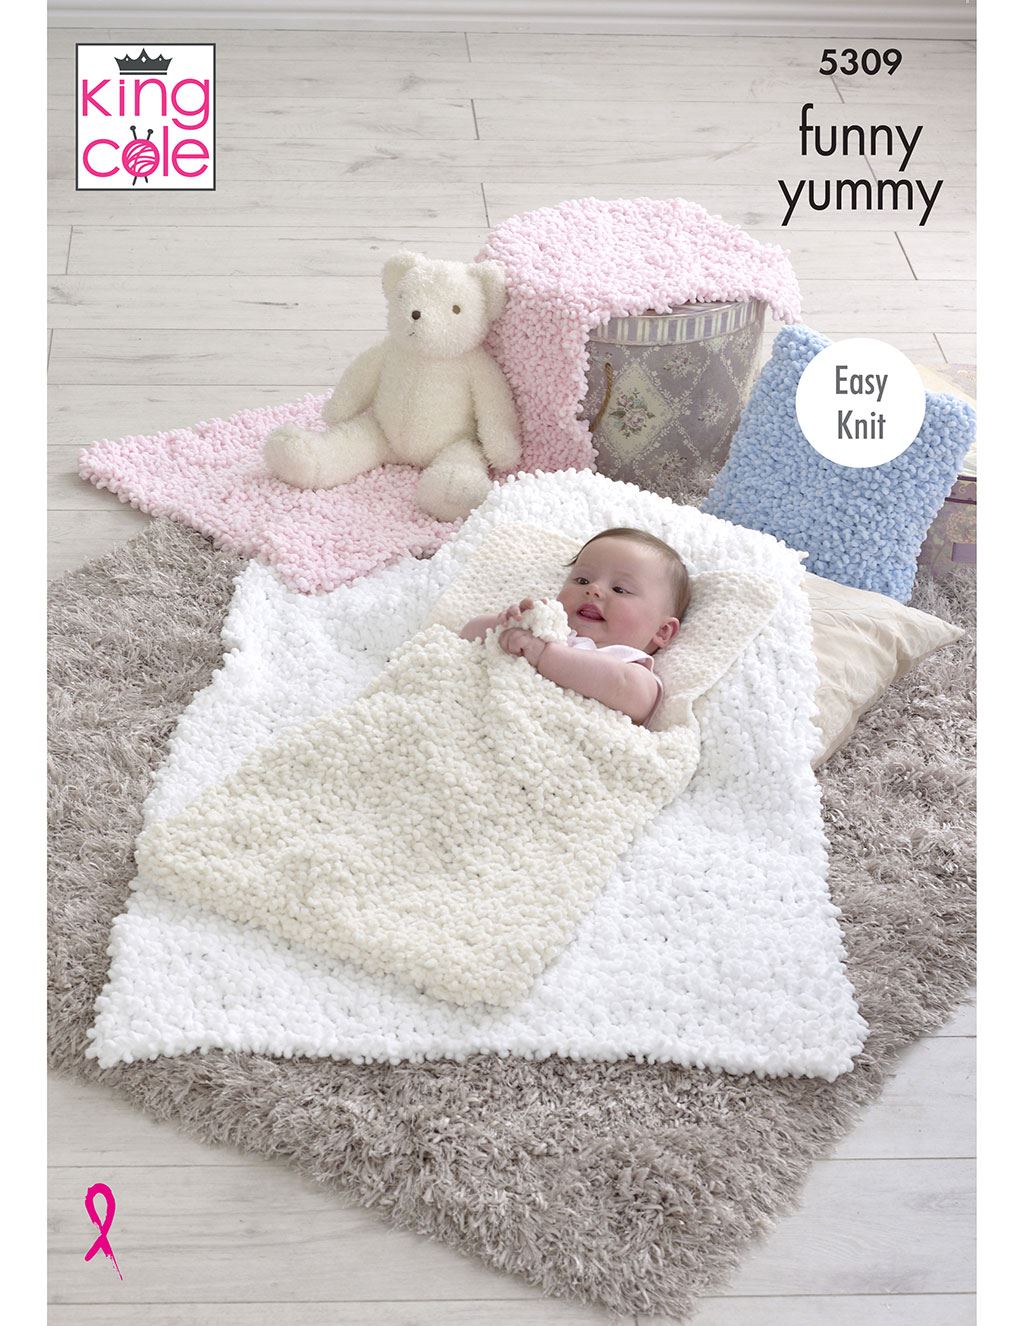 King Cole Funny Yummy knitting pattern (5309) blankets